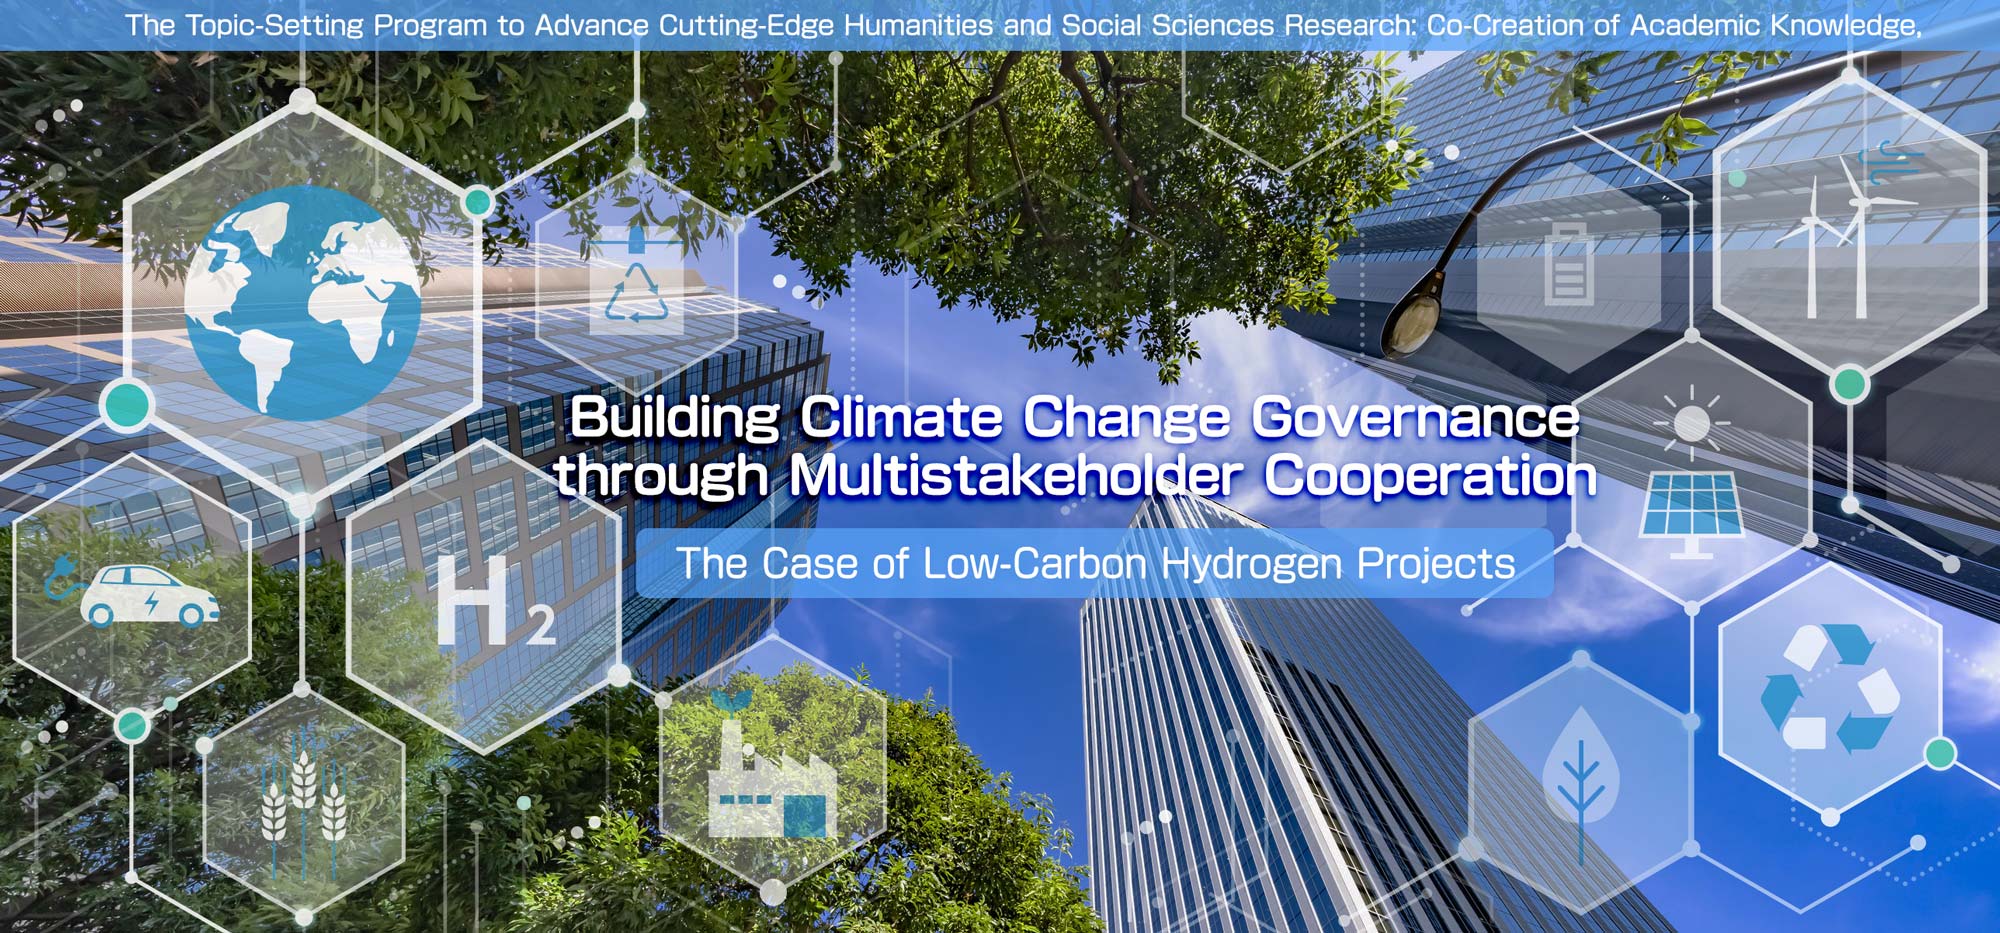 Building Climate Change Governance through Multistakeholder Cooperation: The Case of Low-Carbon Hydrogen Projects